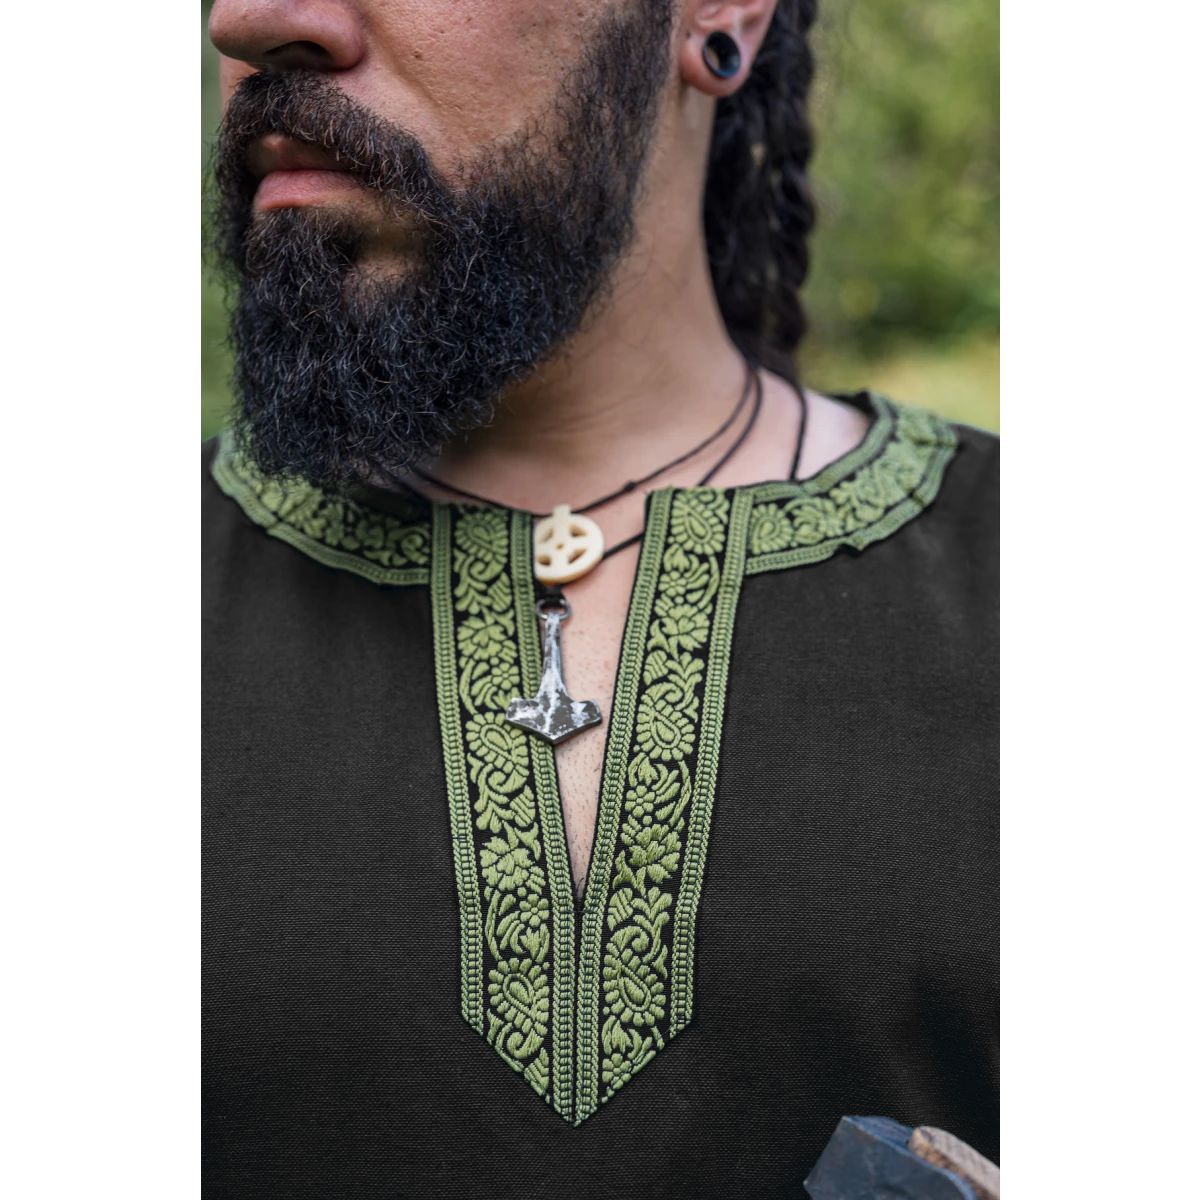 black viking tunic with embroidery border 